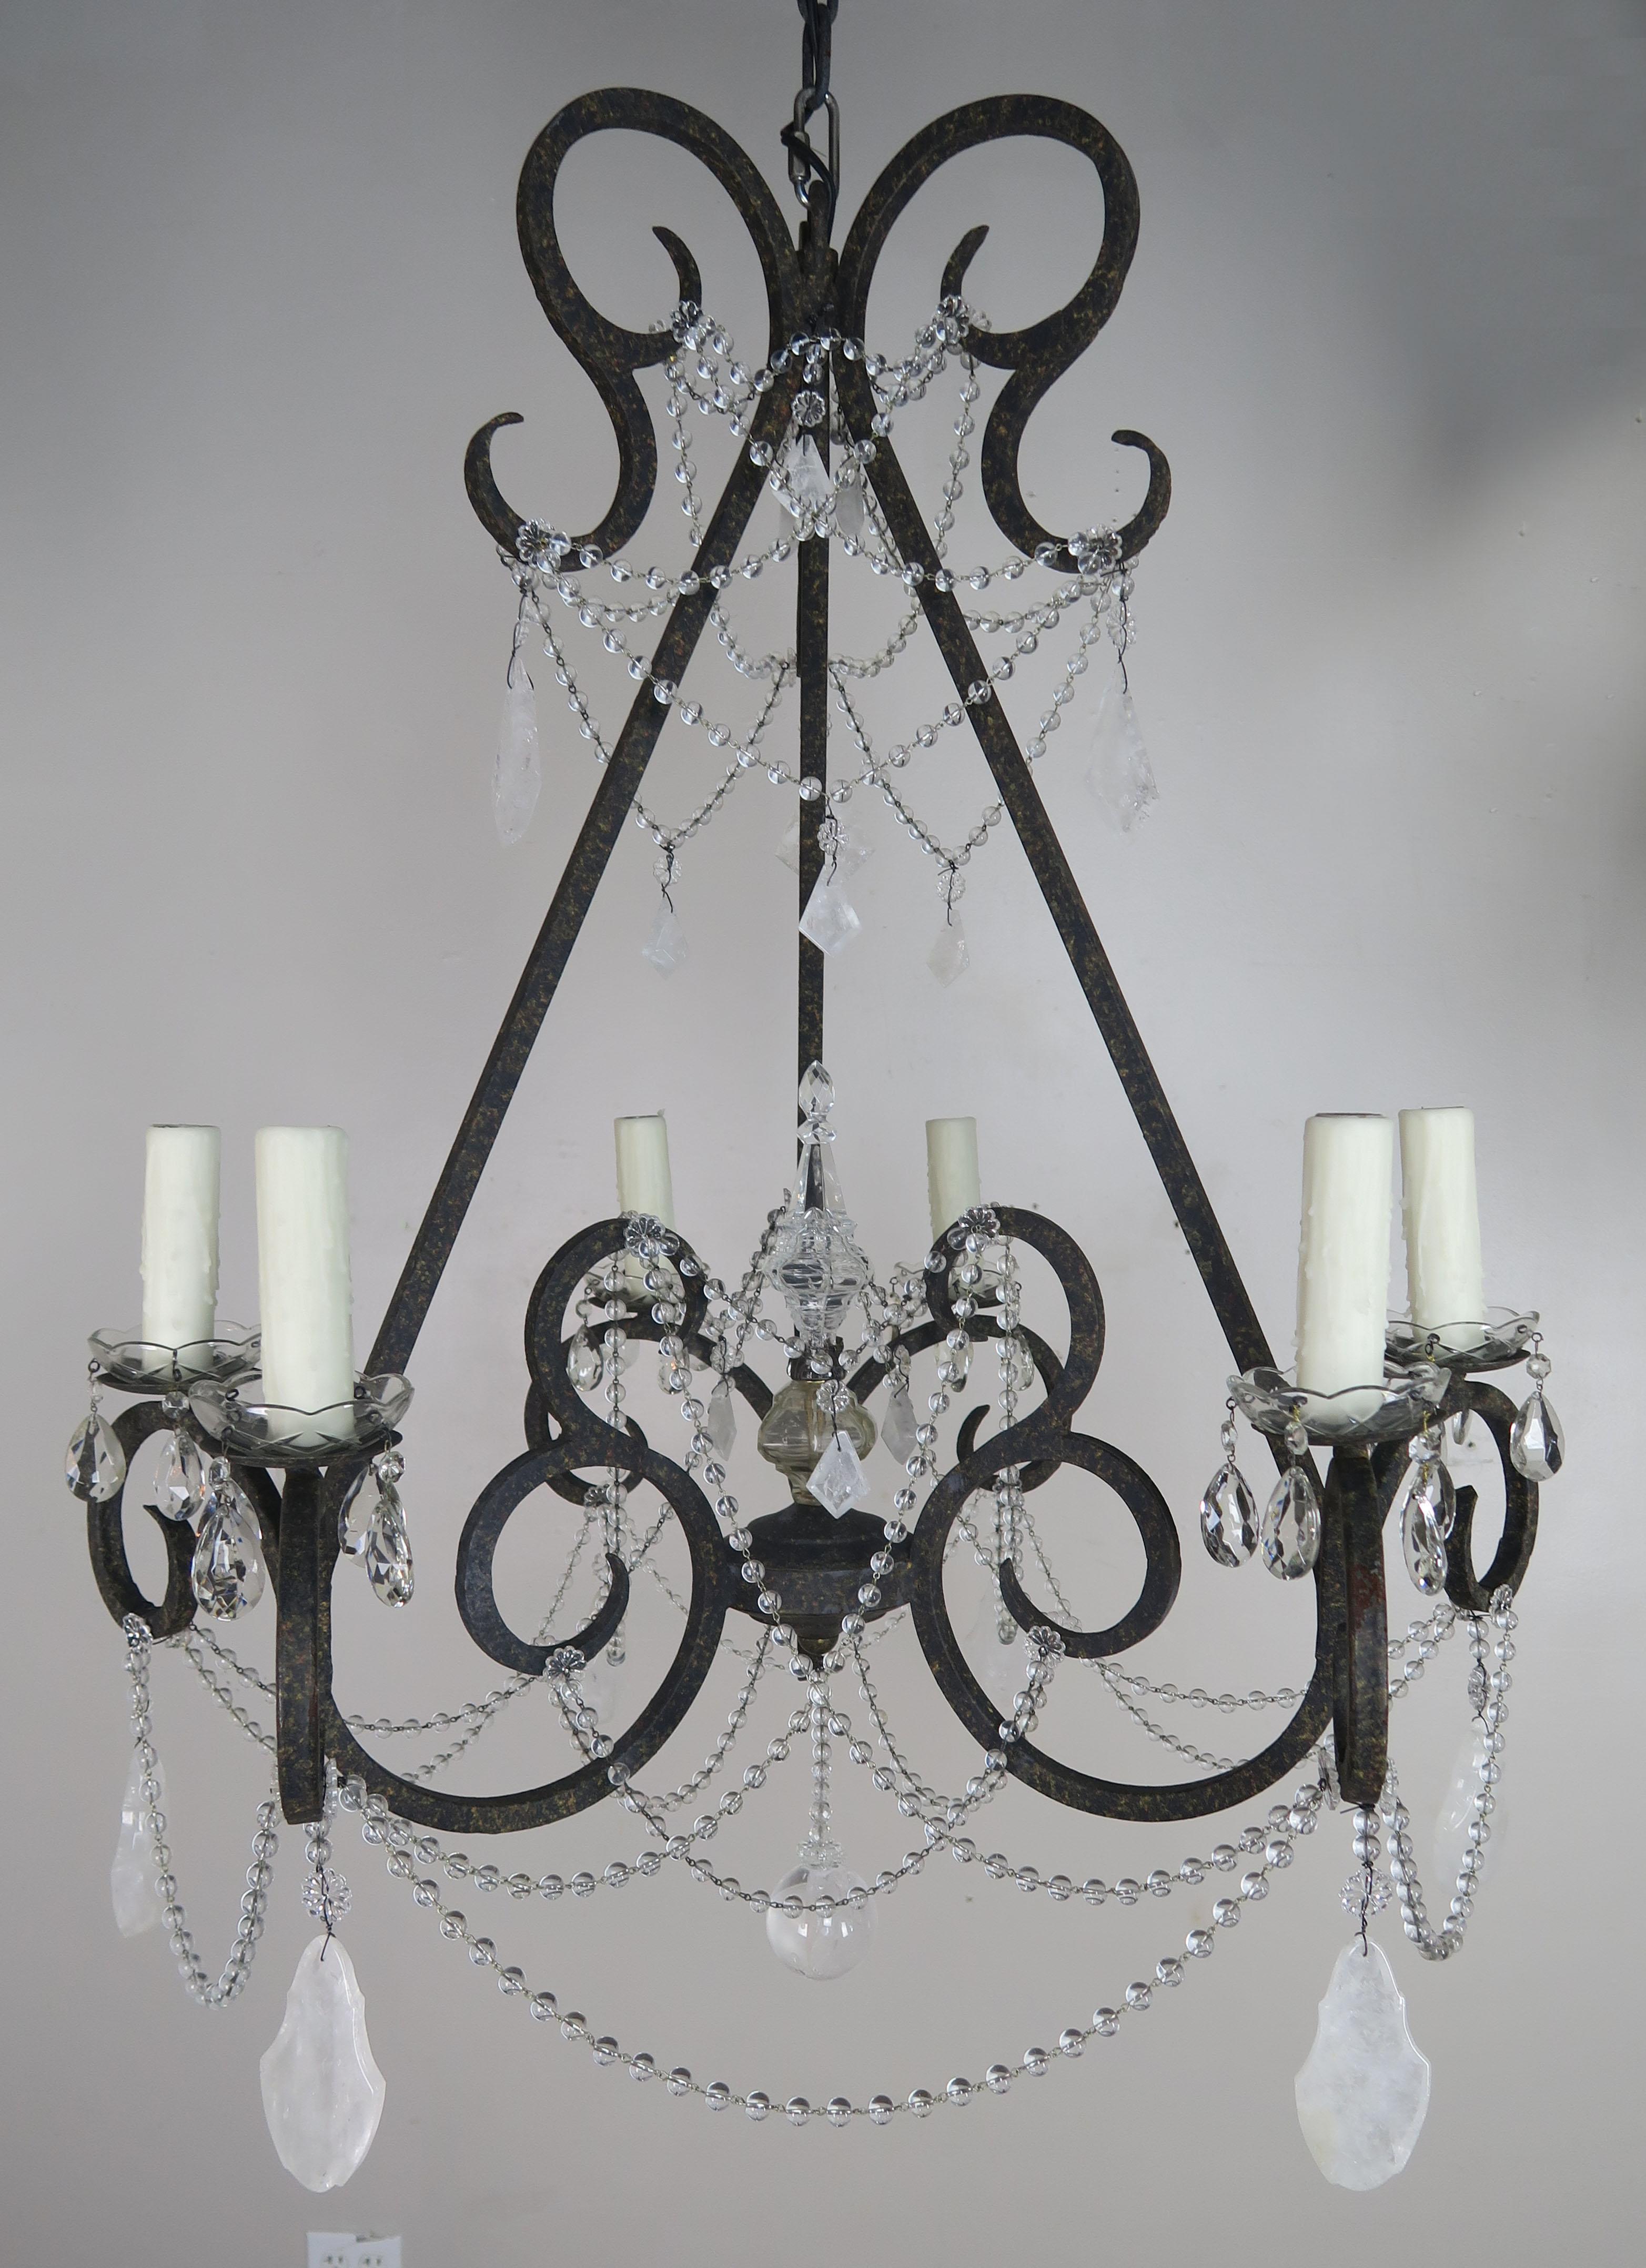 Six-Light Rock Crystal Wrought Iron Chandelier For Sale 3